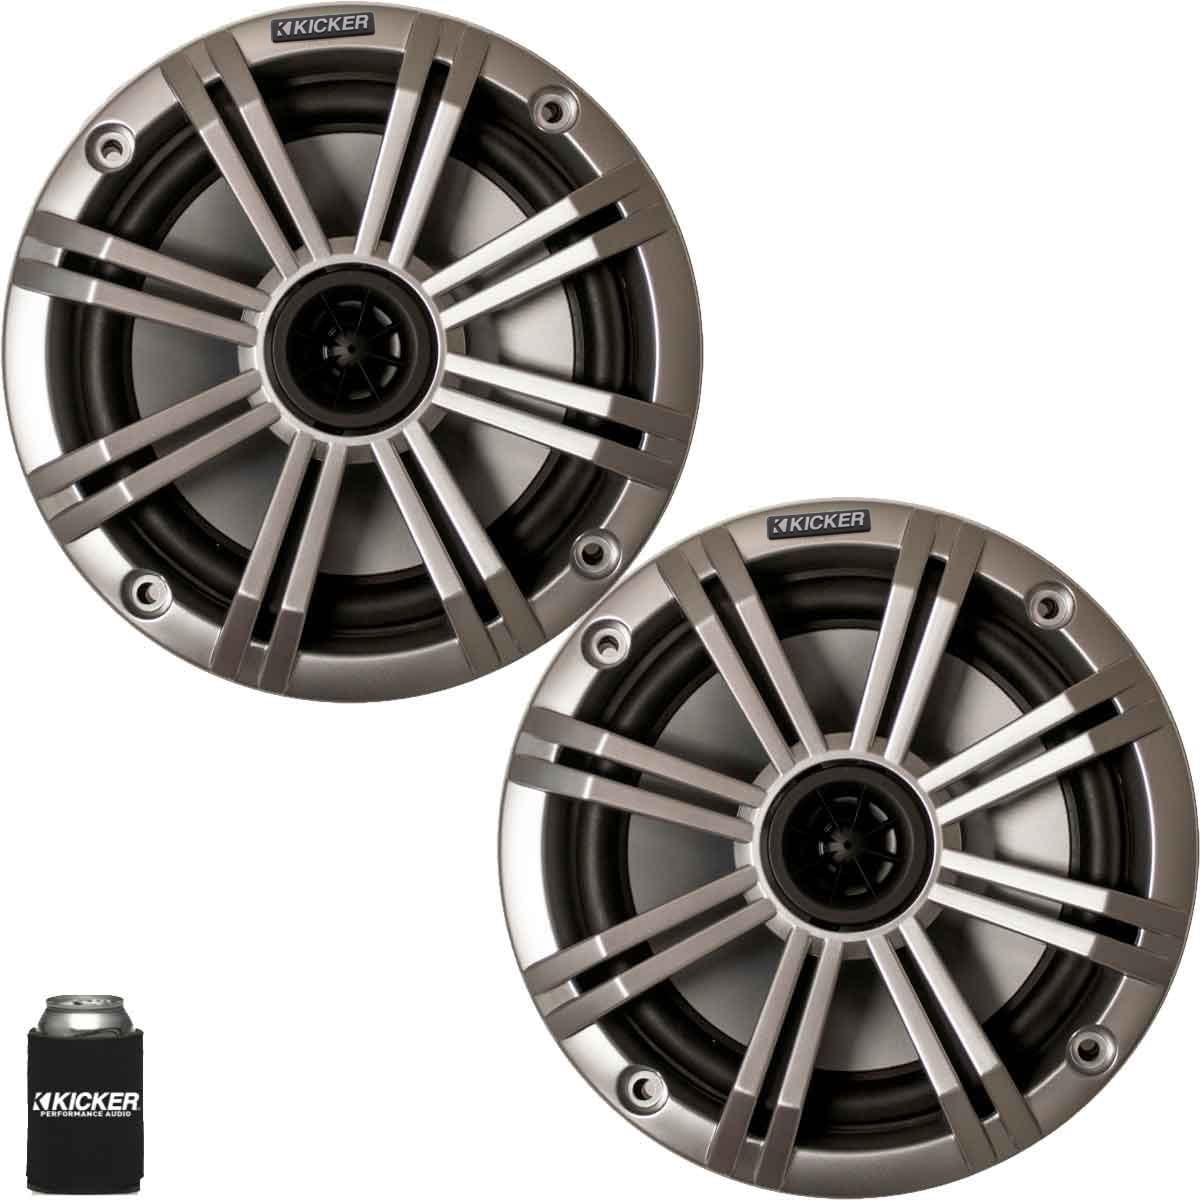 Pair Jensen MSX60CPR 6.5 Chrome Plated 75W Coaxial Speakers 